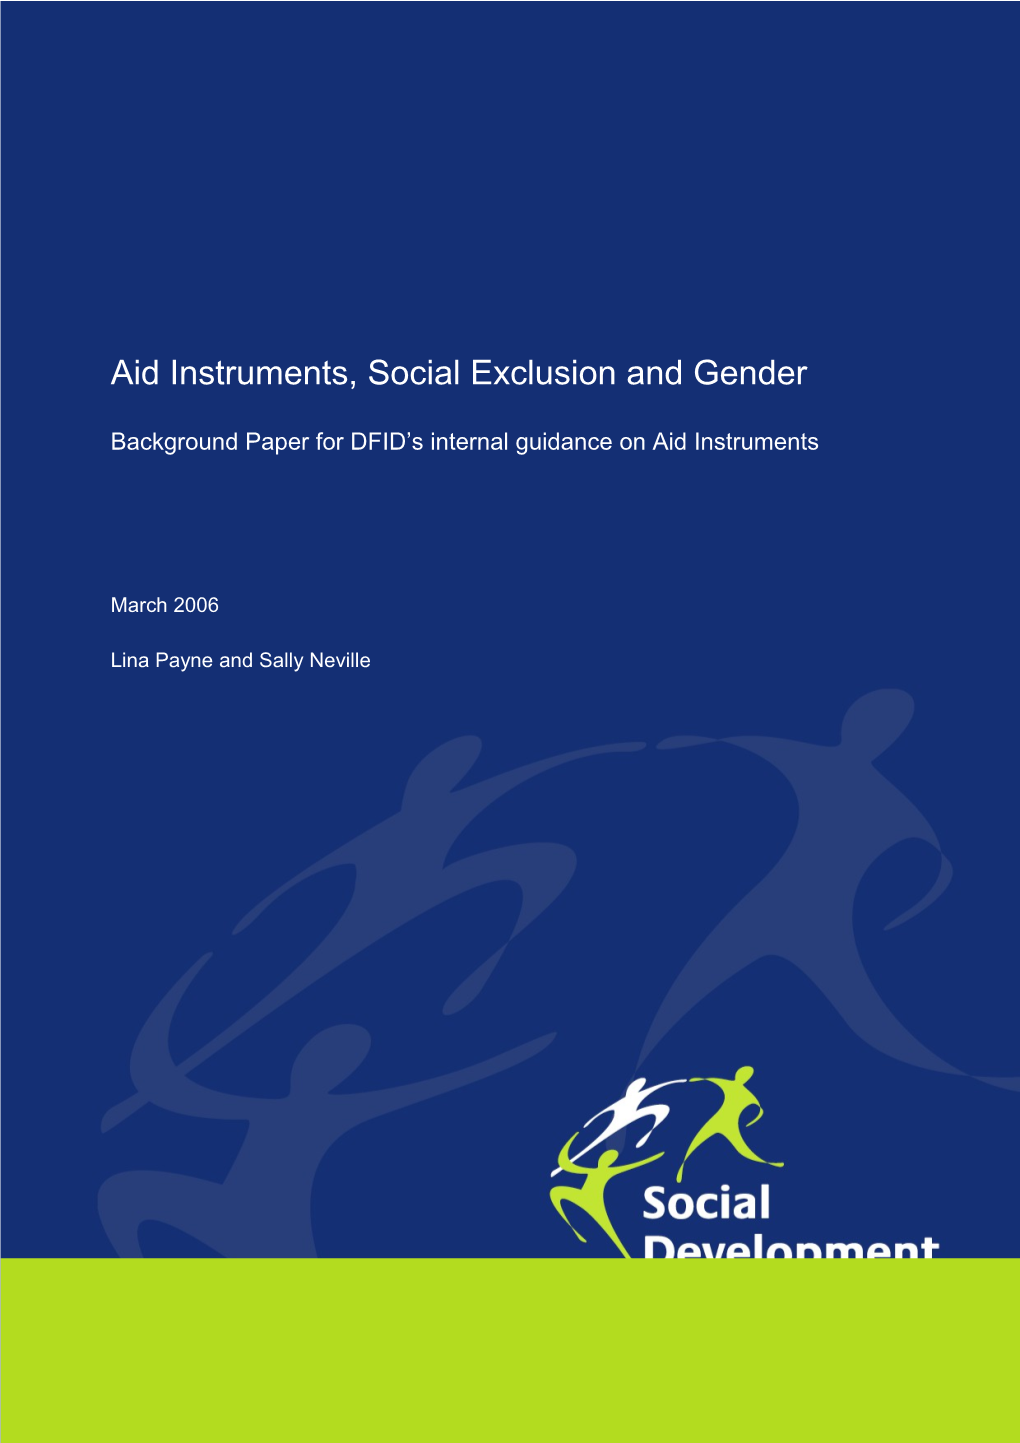 Section 1: Why Social Exclusion and Gender? 4